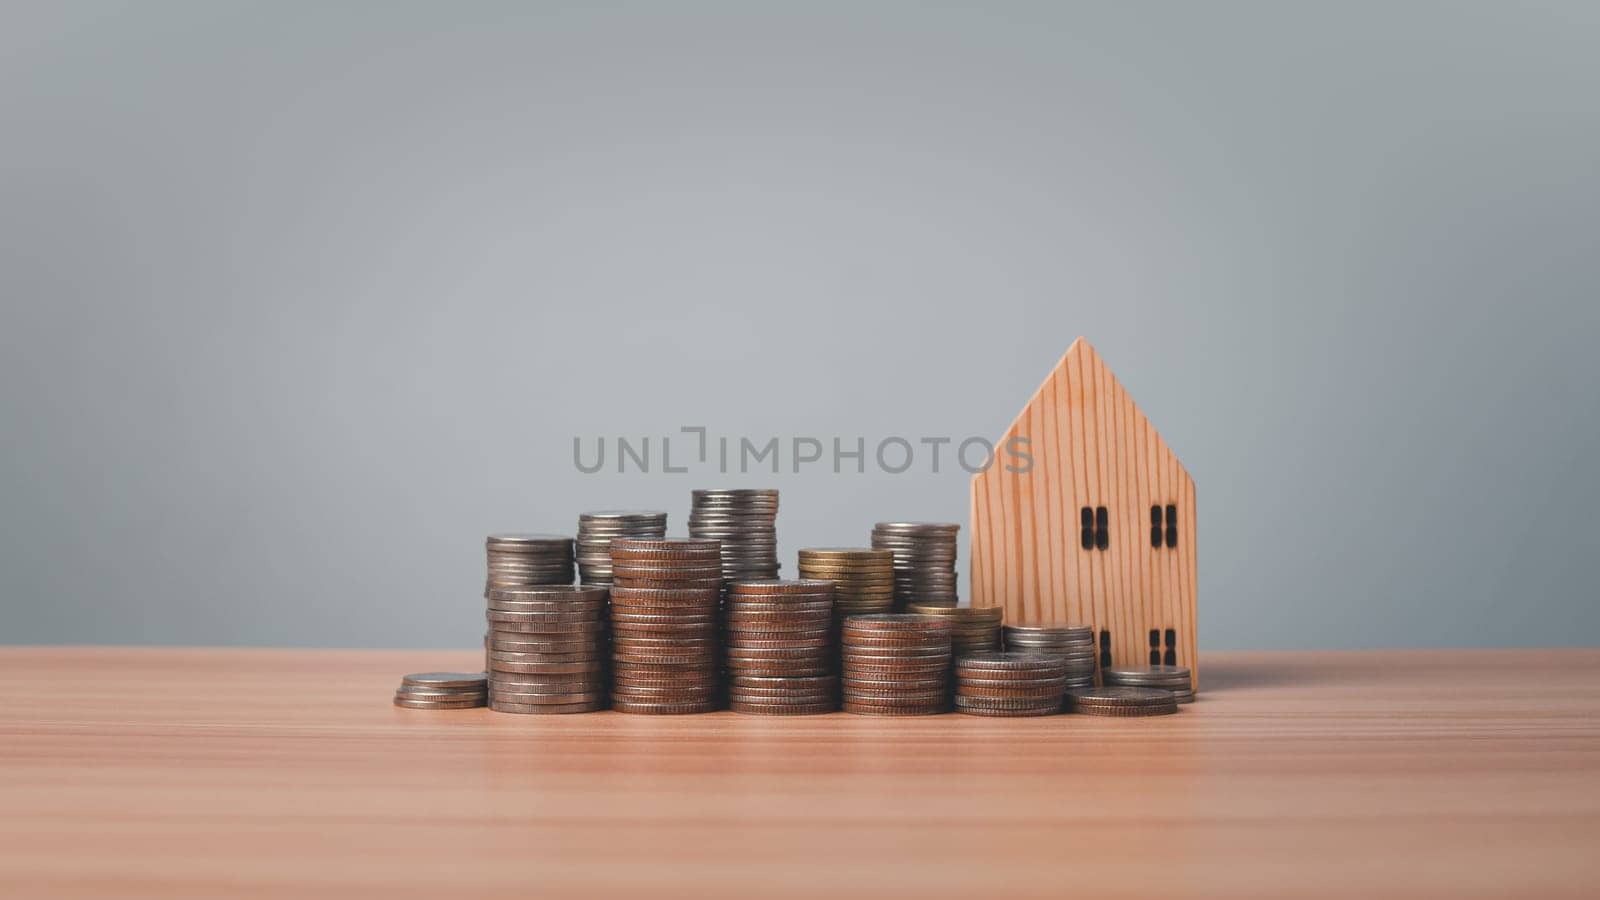 Model wooden house and coins lined up on wooden floor on white background. Concepts of finance, savings and investment. Real estate concepts.